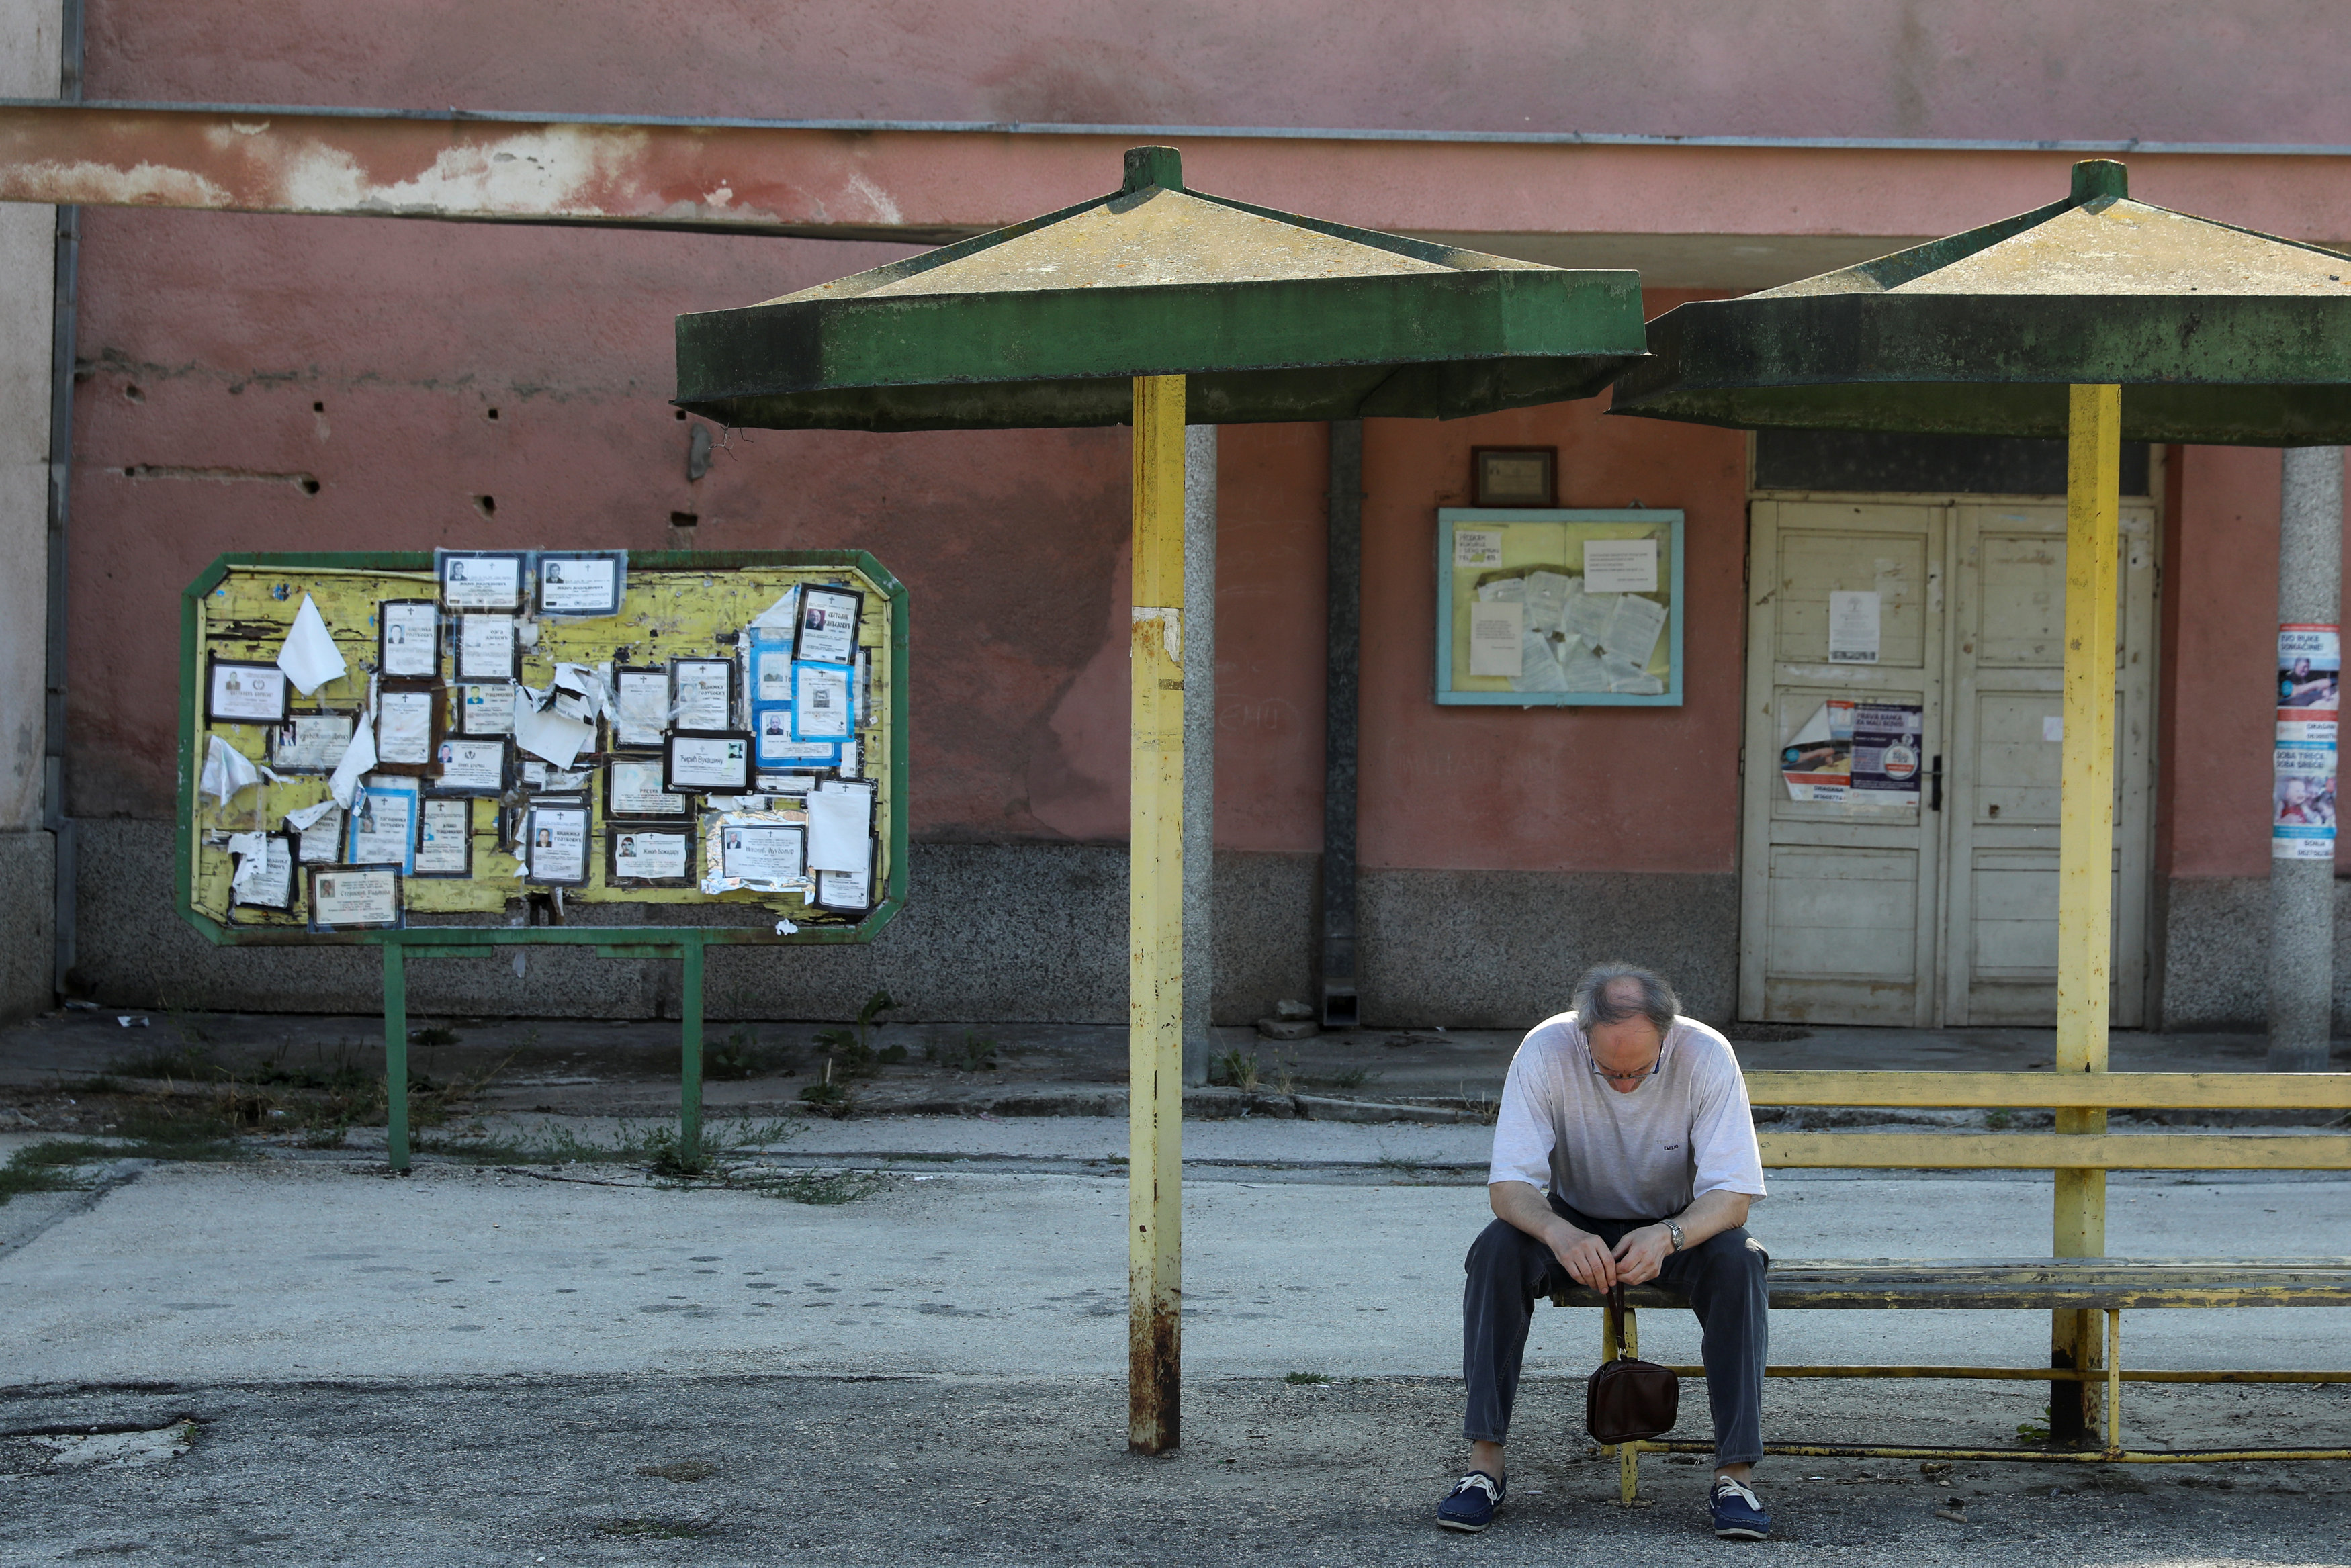 The Wider Image: Depopulation turns Serbia's villages into ghost towns